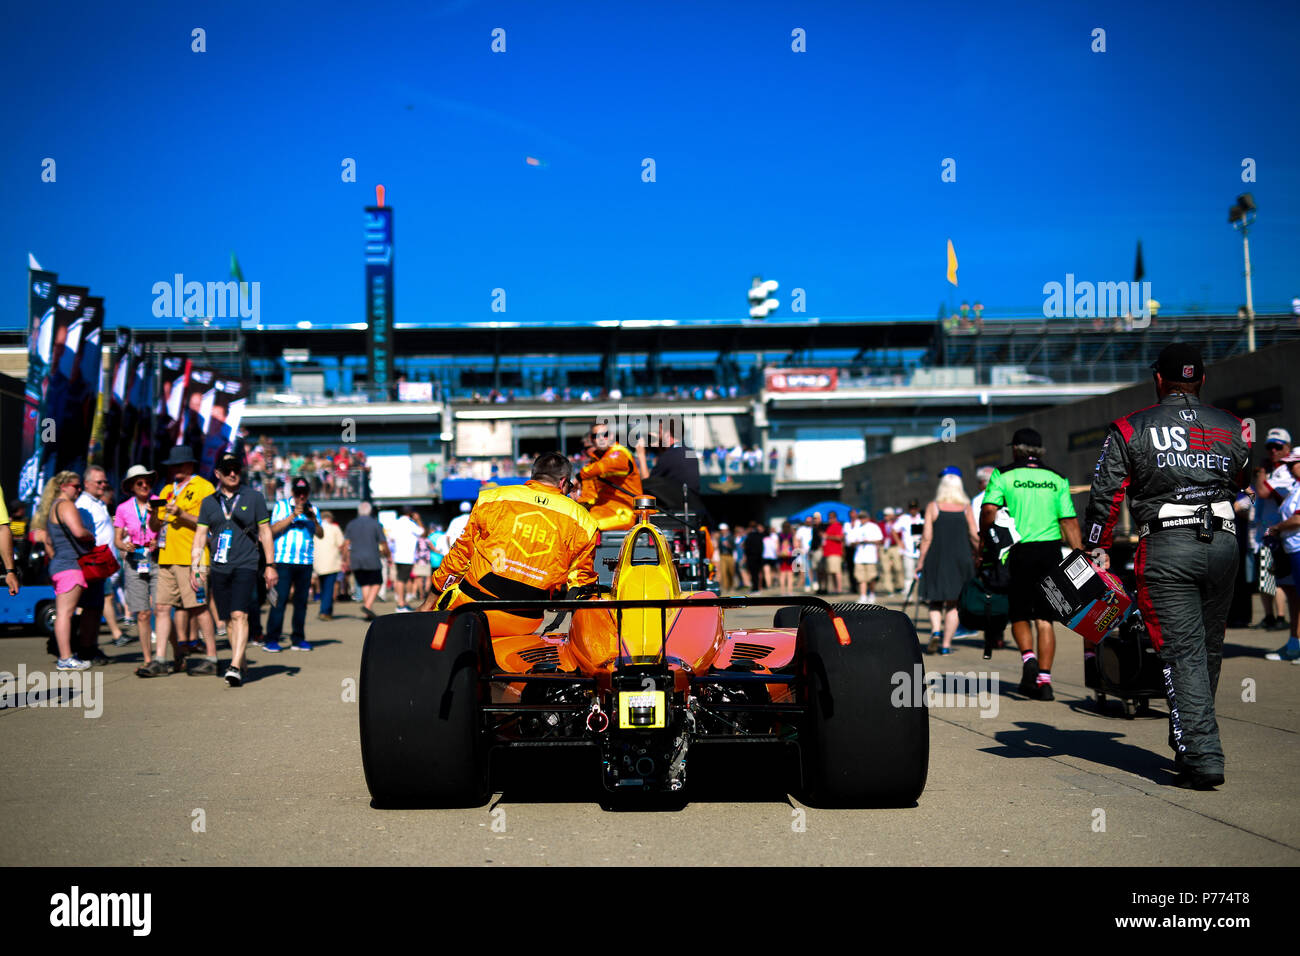 The Andretti Autosport crew of Zach Veach with the number 26 car at the Indy 500 race. Credit: Shivraj Gohil / Spacesuit Media. Stock Photo